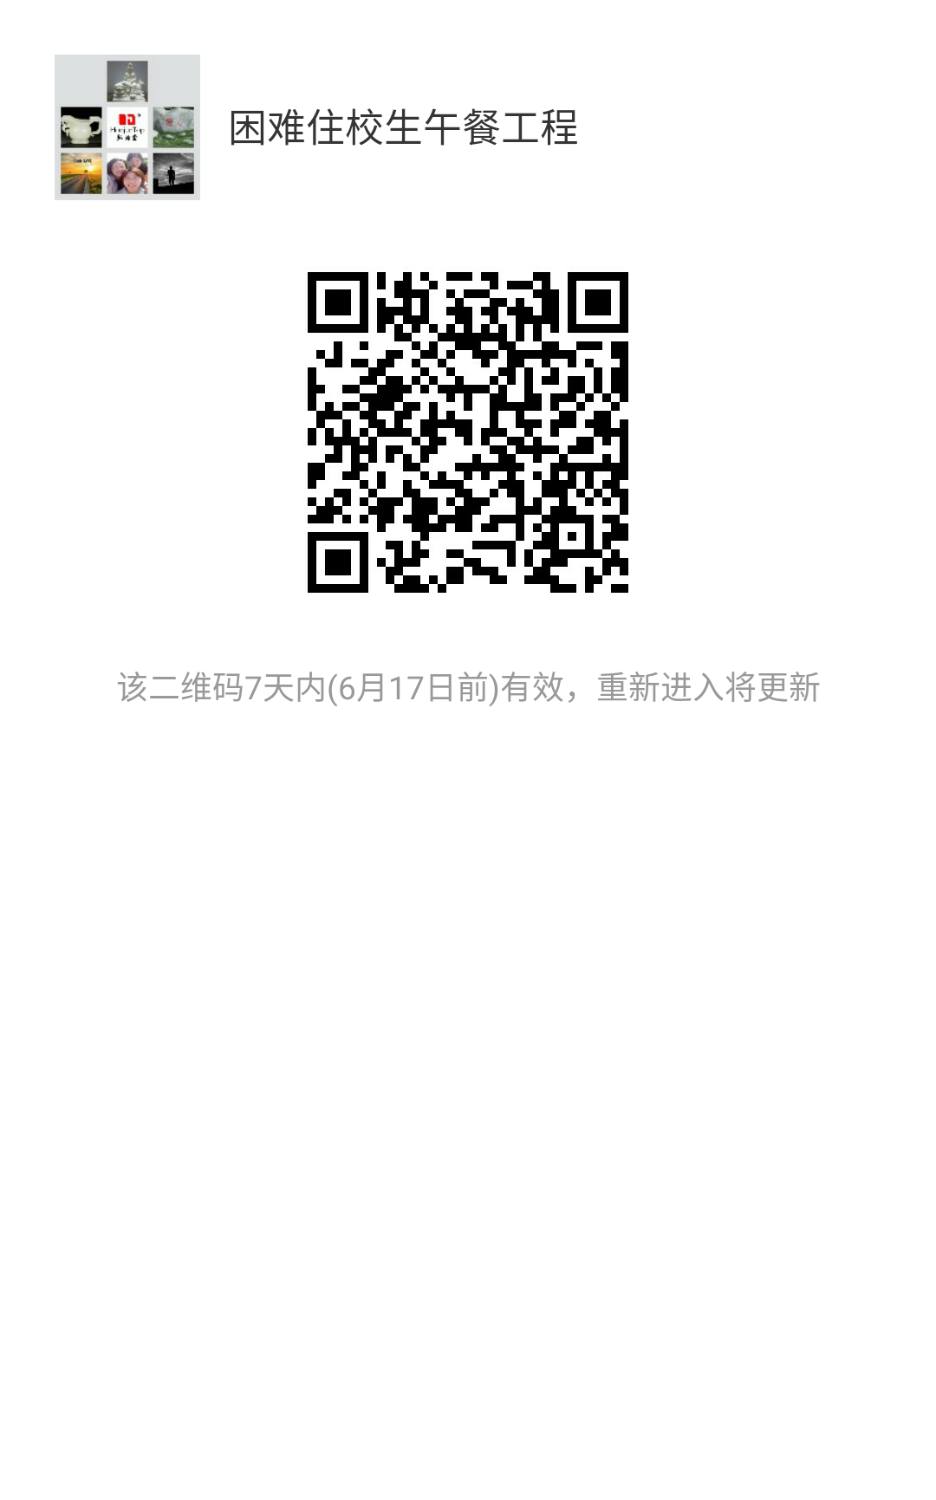 mmqrcode1497103391688.png